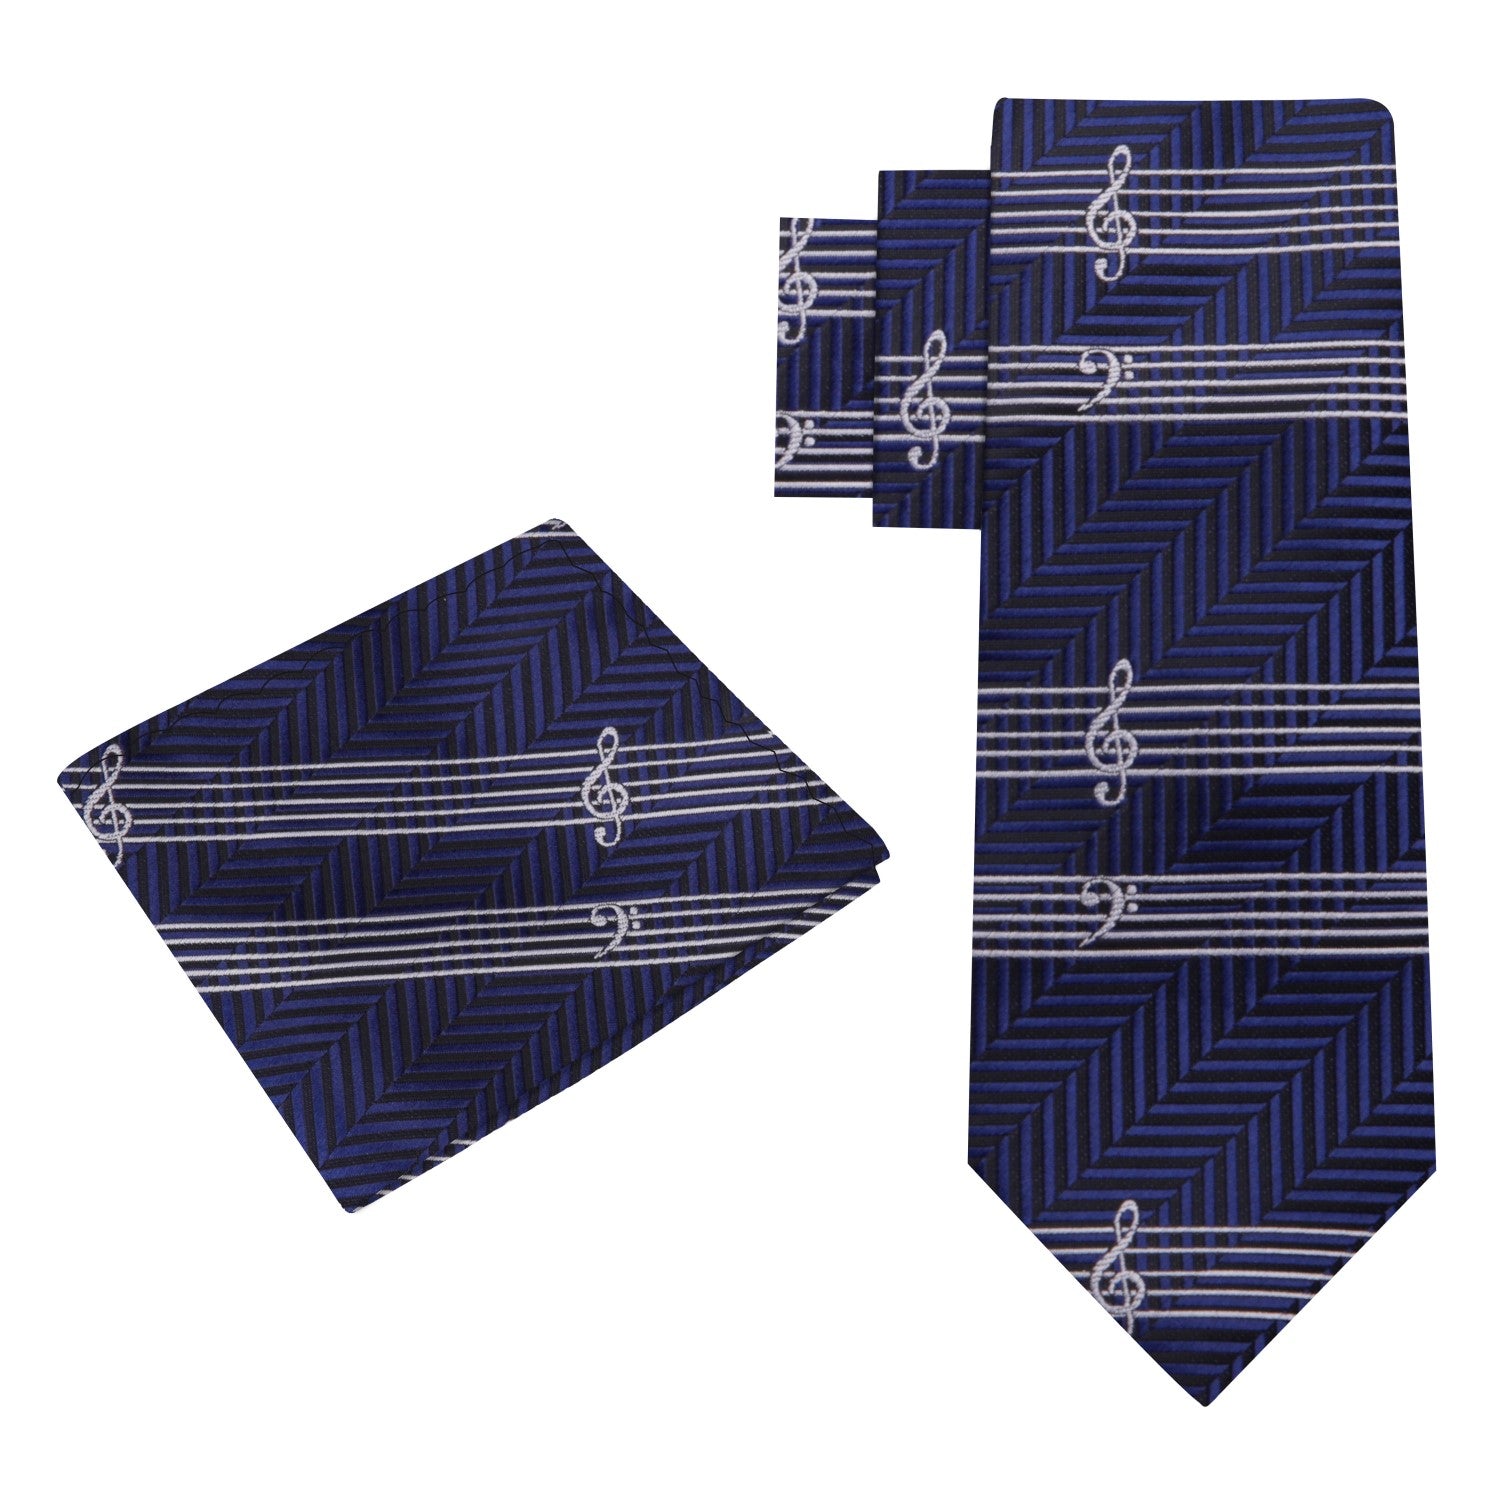 Alt View: Blue White Music Tie and Pocket Square